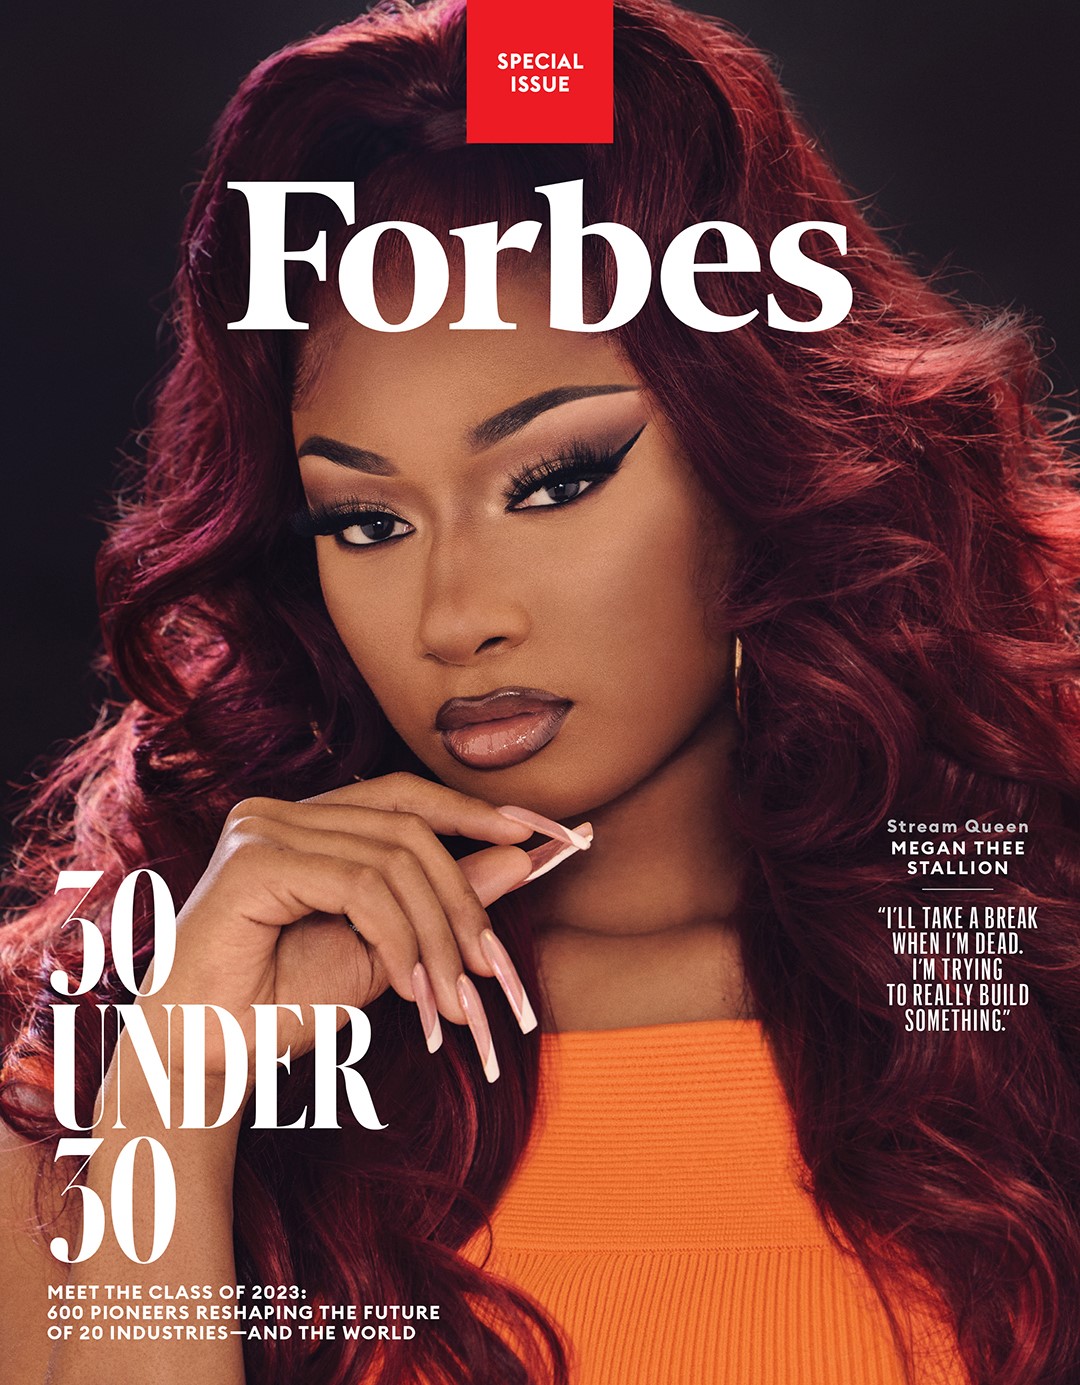 Houston rapper Megan Thee Stallion makes historic appearance on cover of Forbes – Houston Public Media